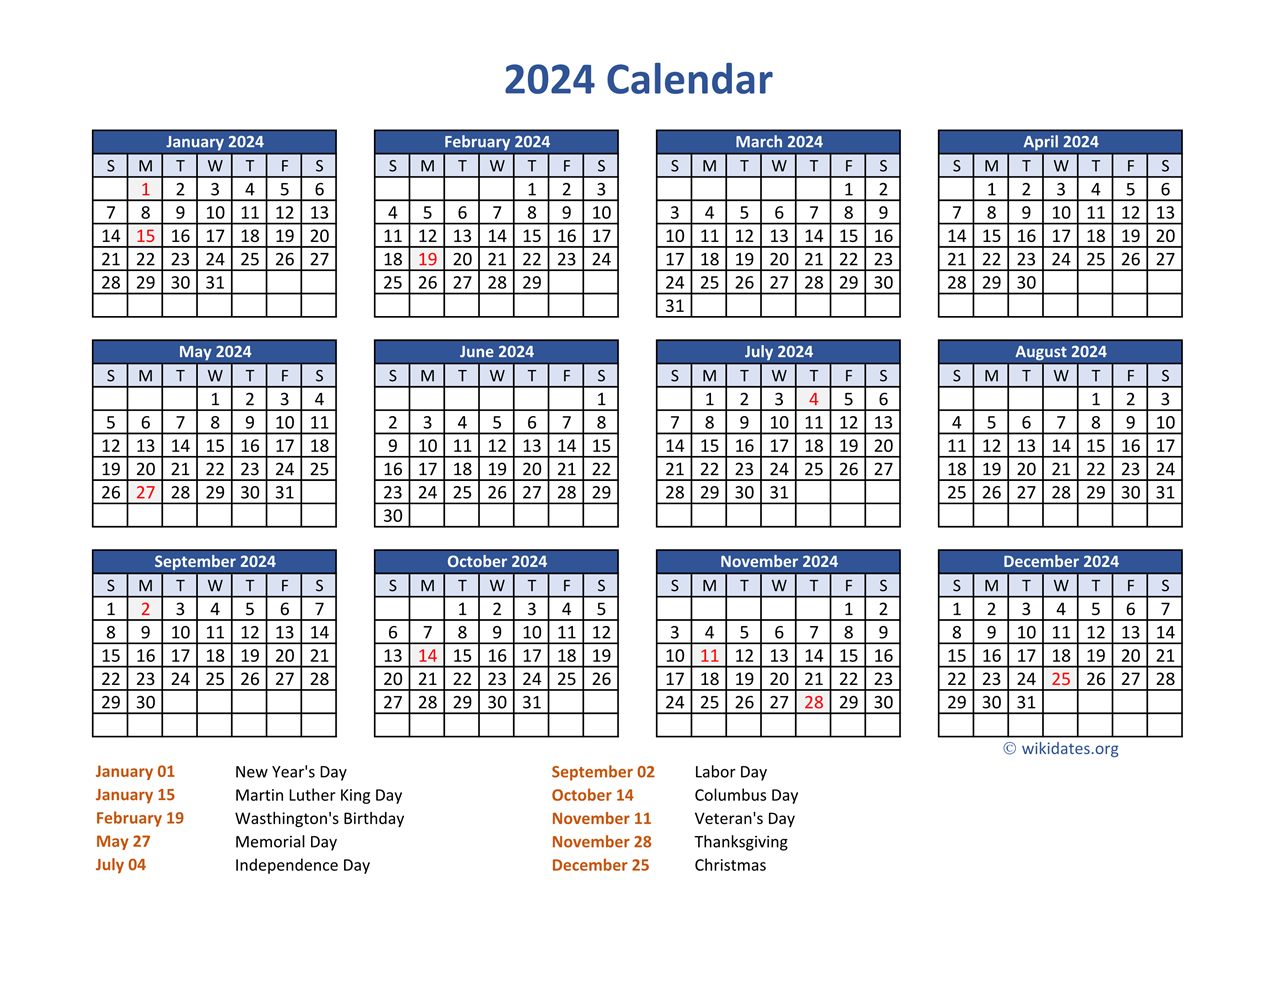 Pdf Calendar 2024 With Federal Holidays | Wikidates for 2024 Yearly Calendar Printable With Holidays